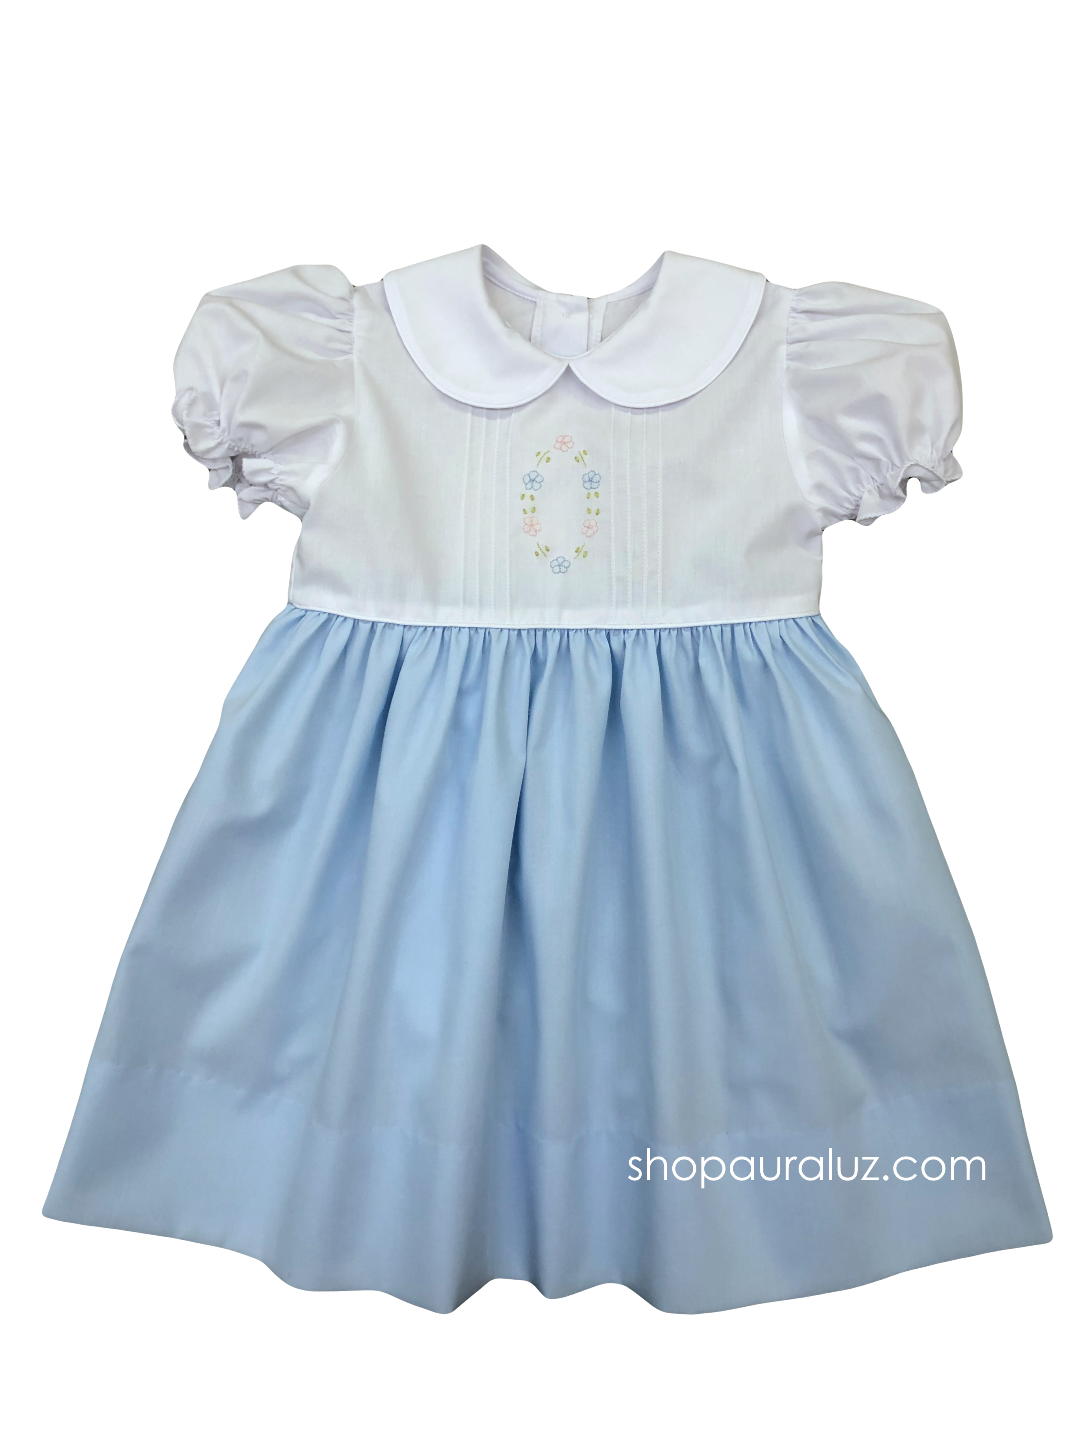 Auraluz Dress...Blue/white with tucks, p.p. collar and embroidered flowers